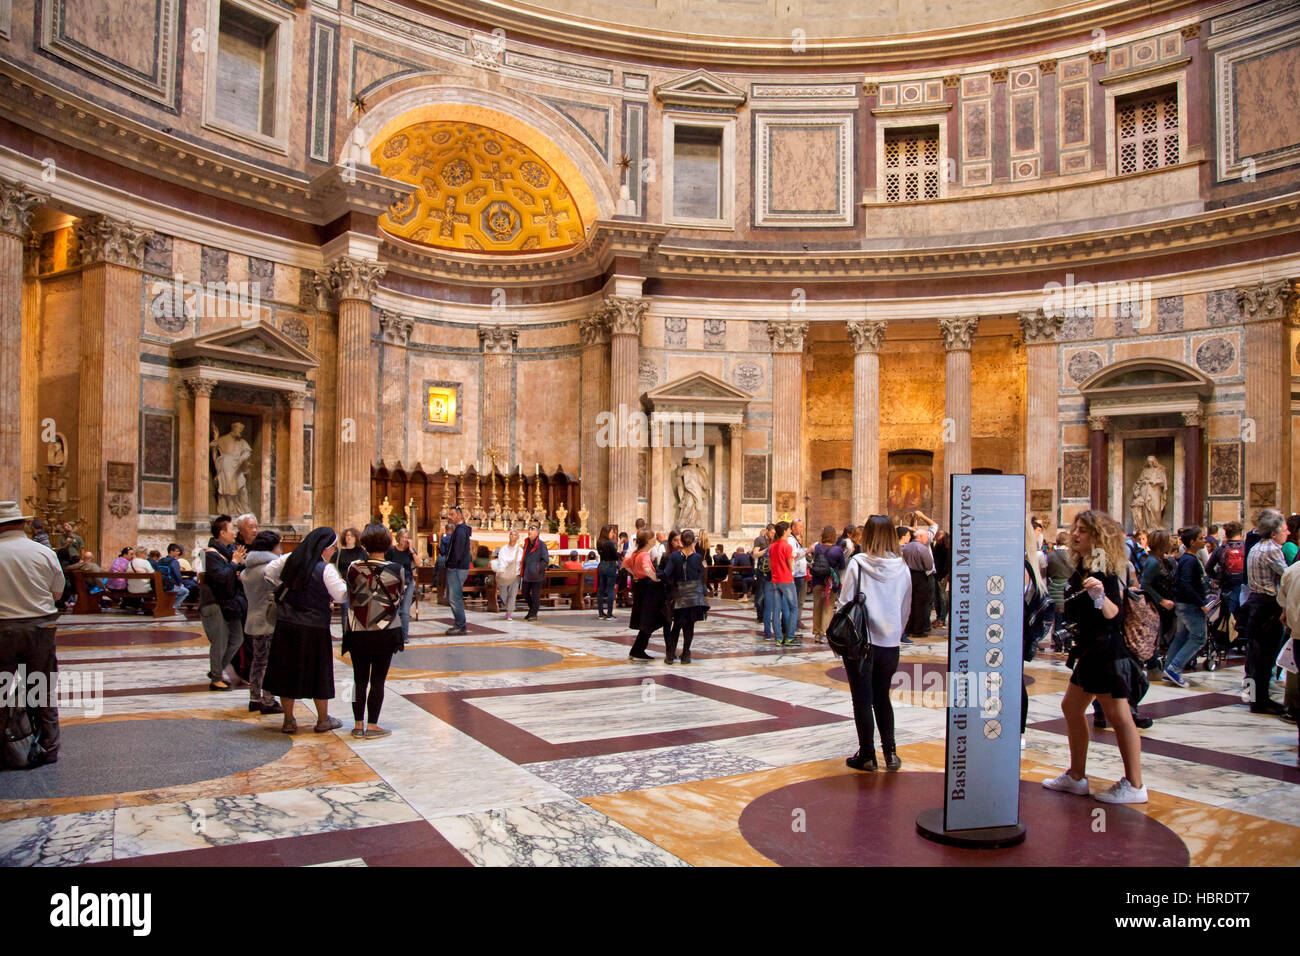 Rome, Pantheon interior, now Basilica di Santa Maria ad Martyres, towards the altar, with tourists and visitors Stock Photo